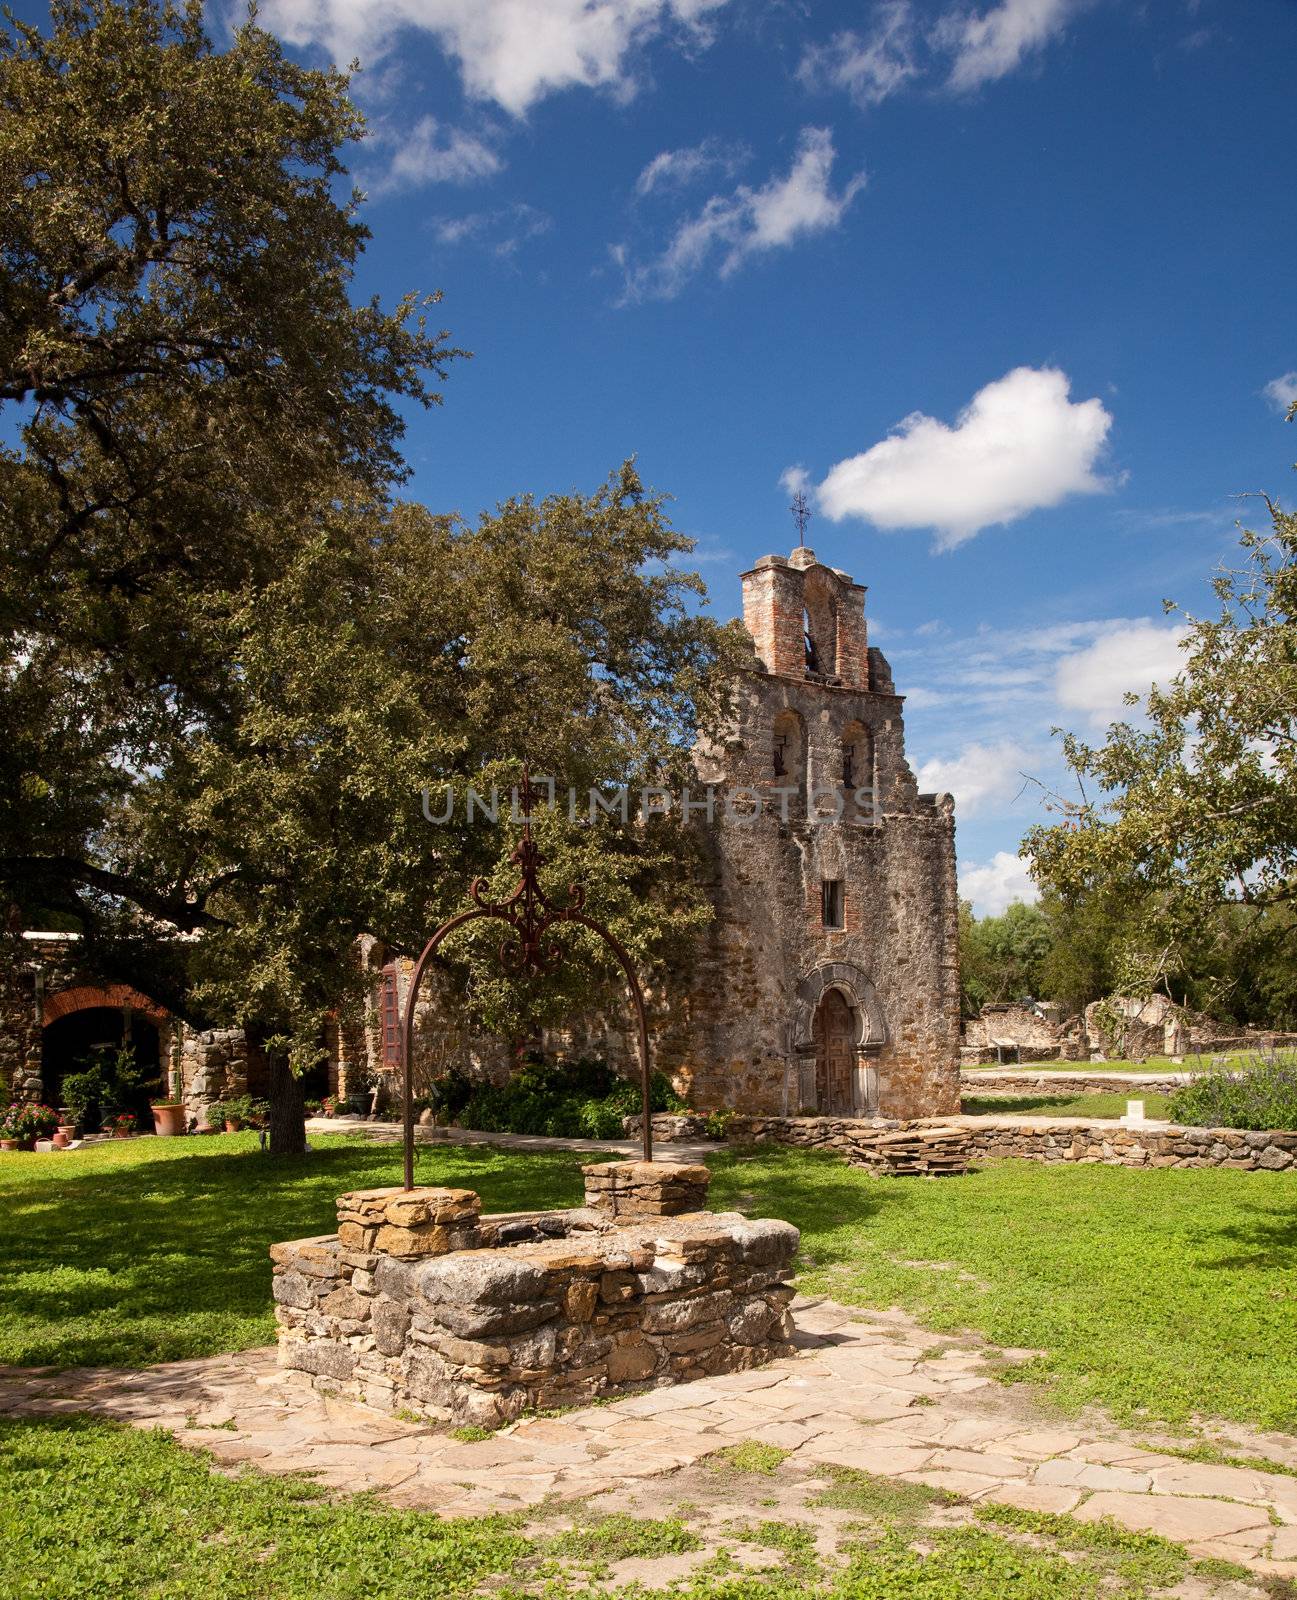 View of the garden and well in front of the Mission Espada near San Antonio in Texas